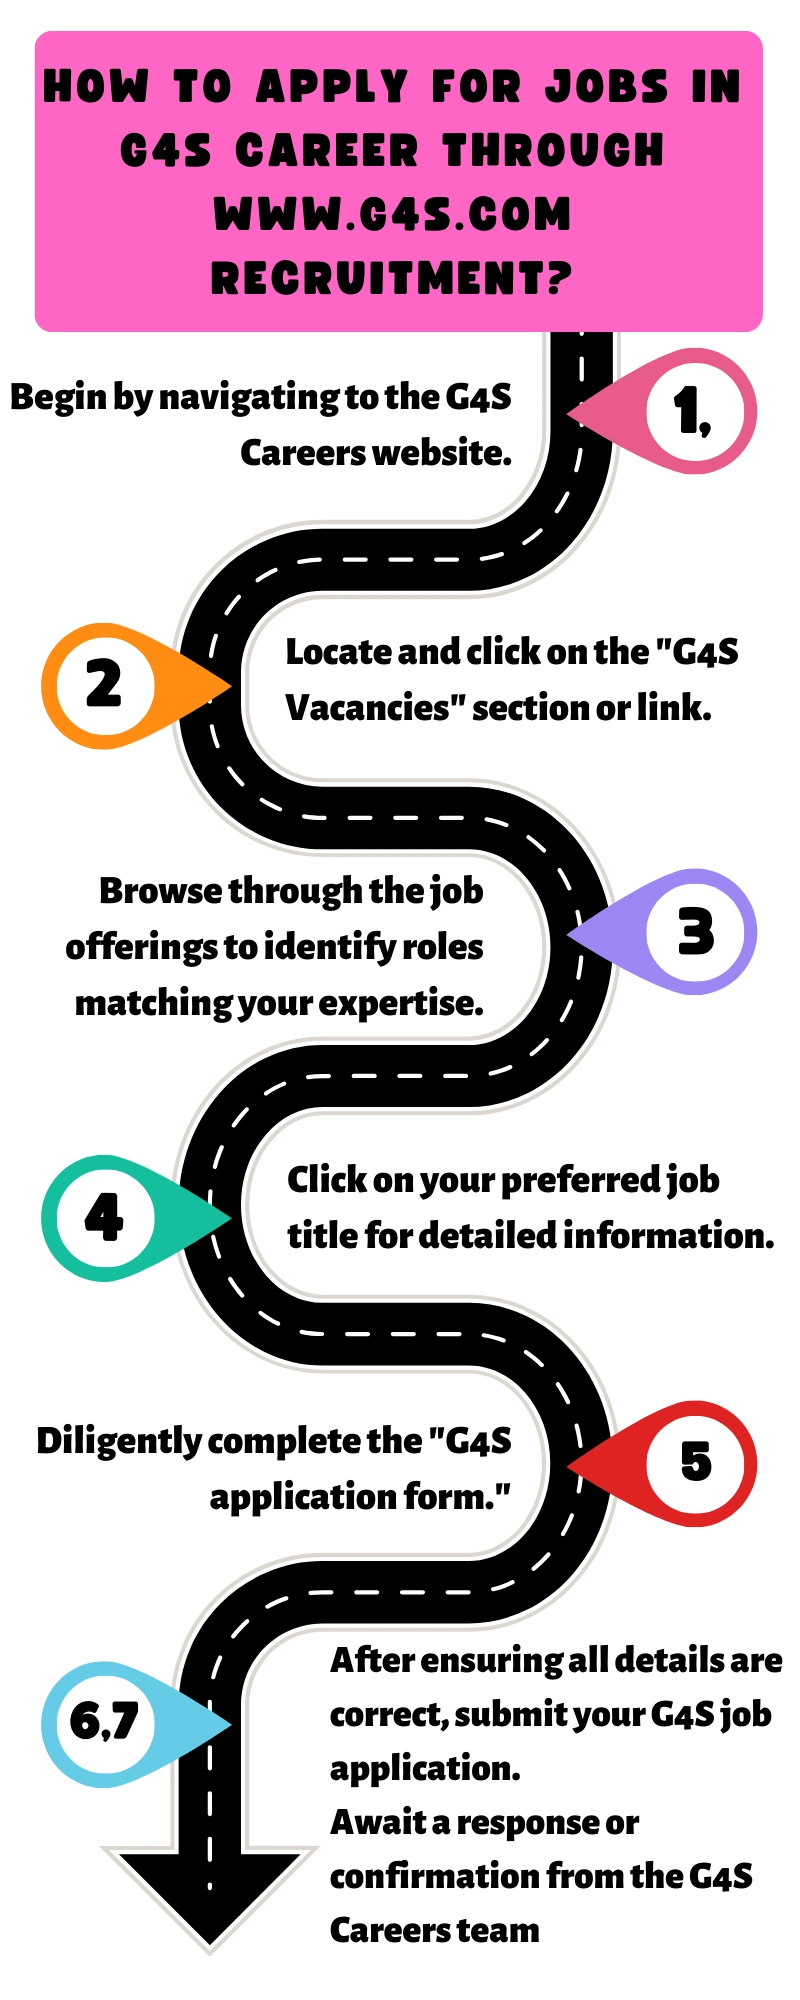 How to Apply for Jobs in G4S Career through www.g4s.com recruitment?